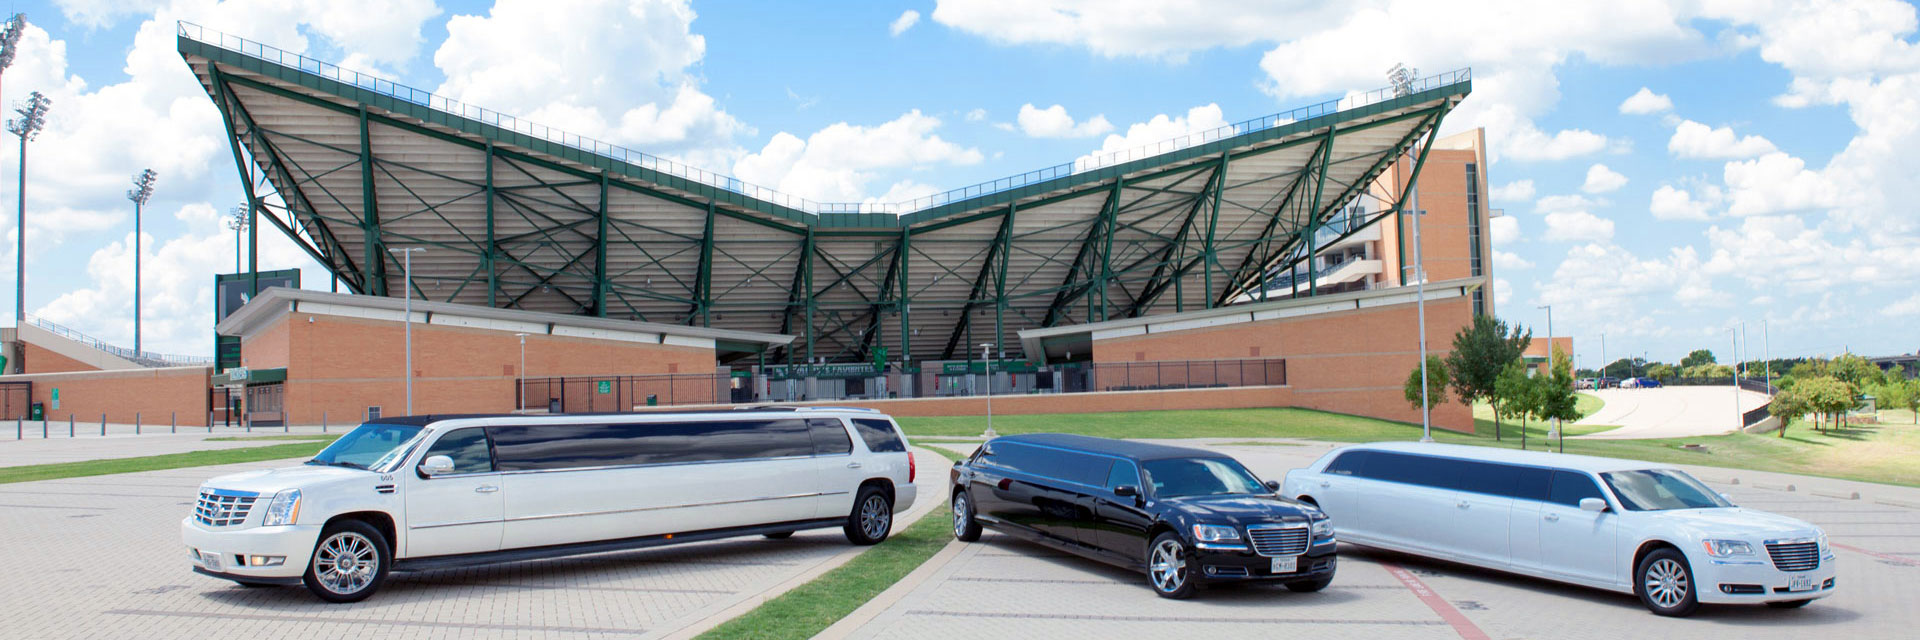 Three limousines parked outside a stadium.